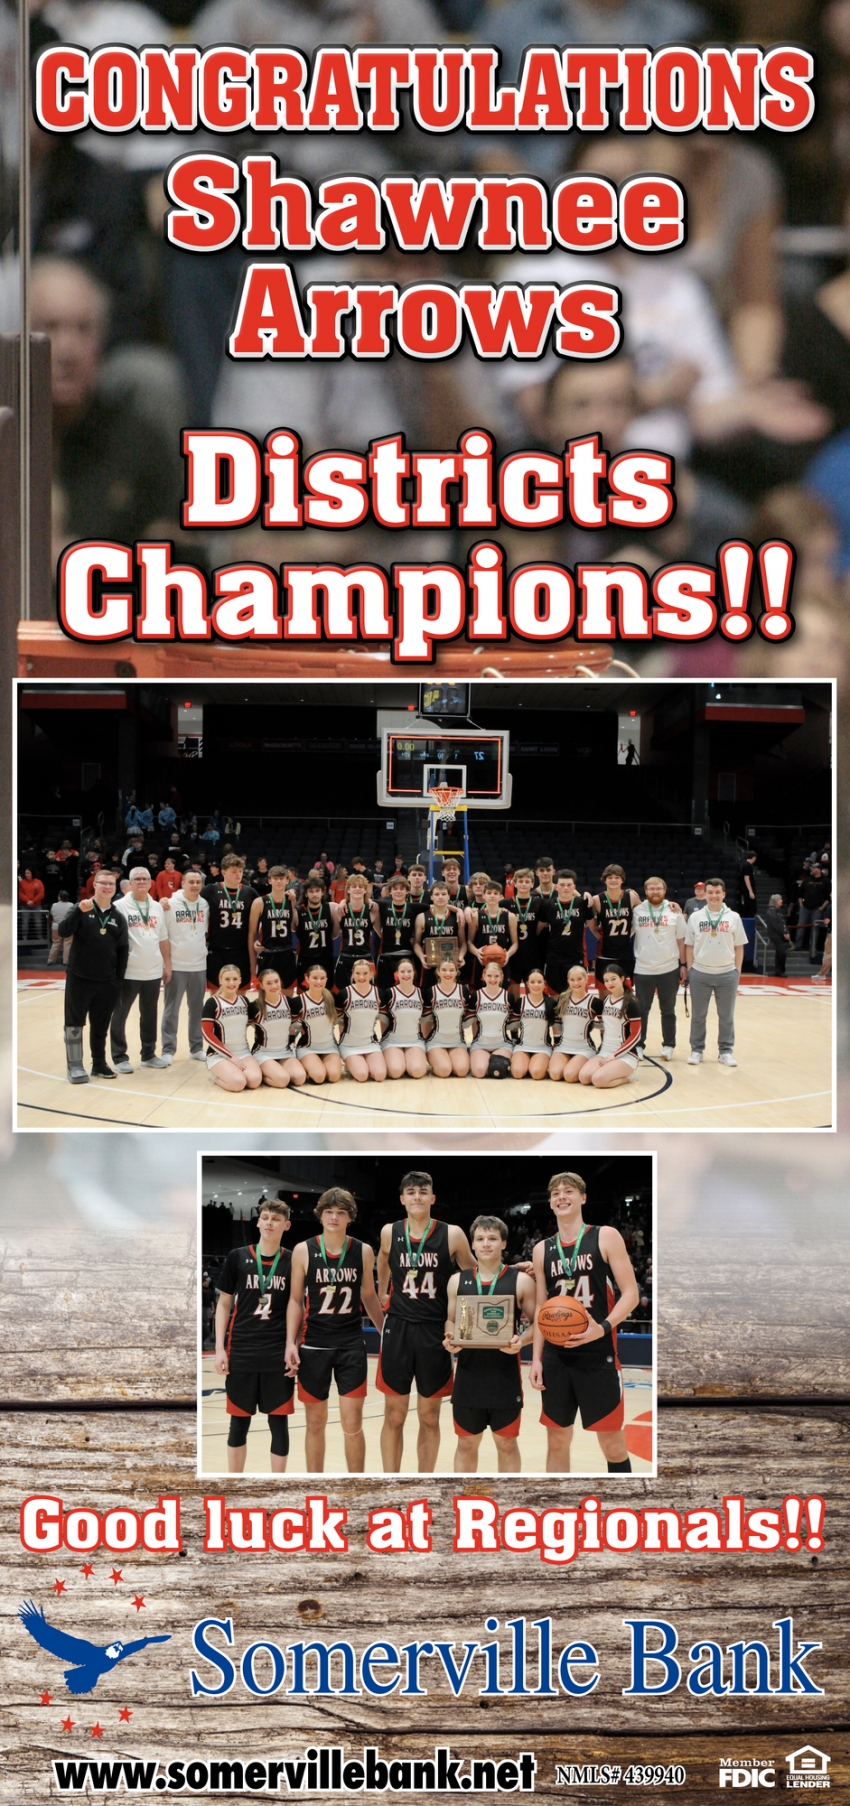 Districts Champions!